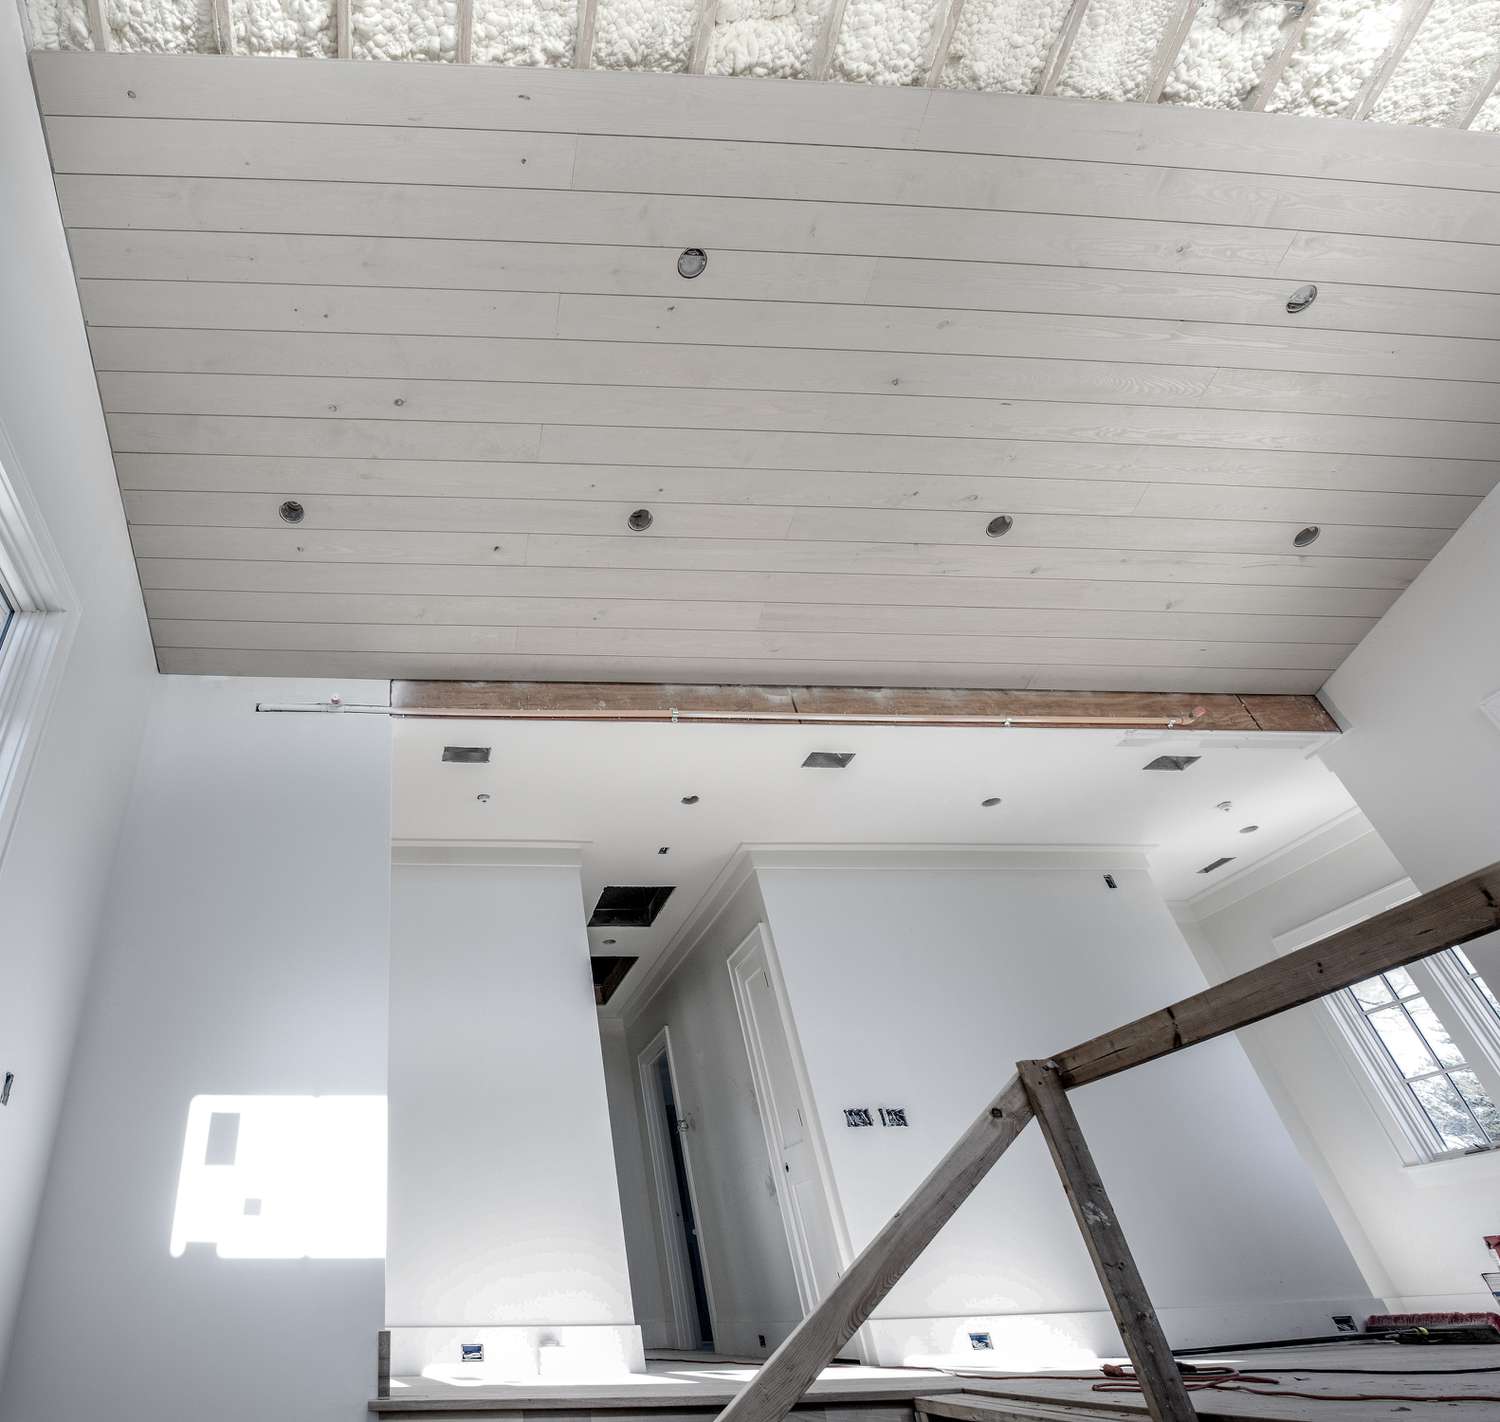 Beadboard being installed on a ceiling